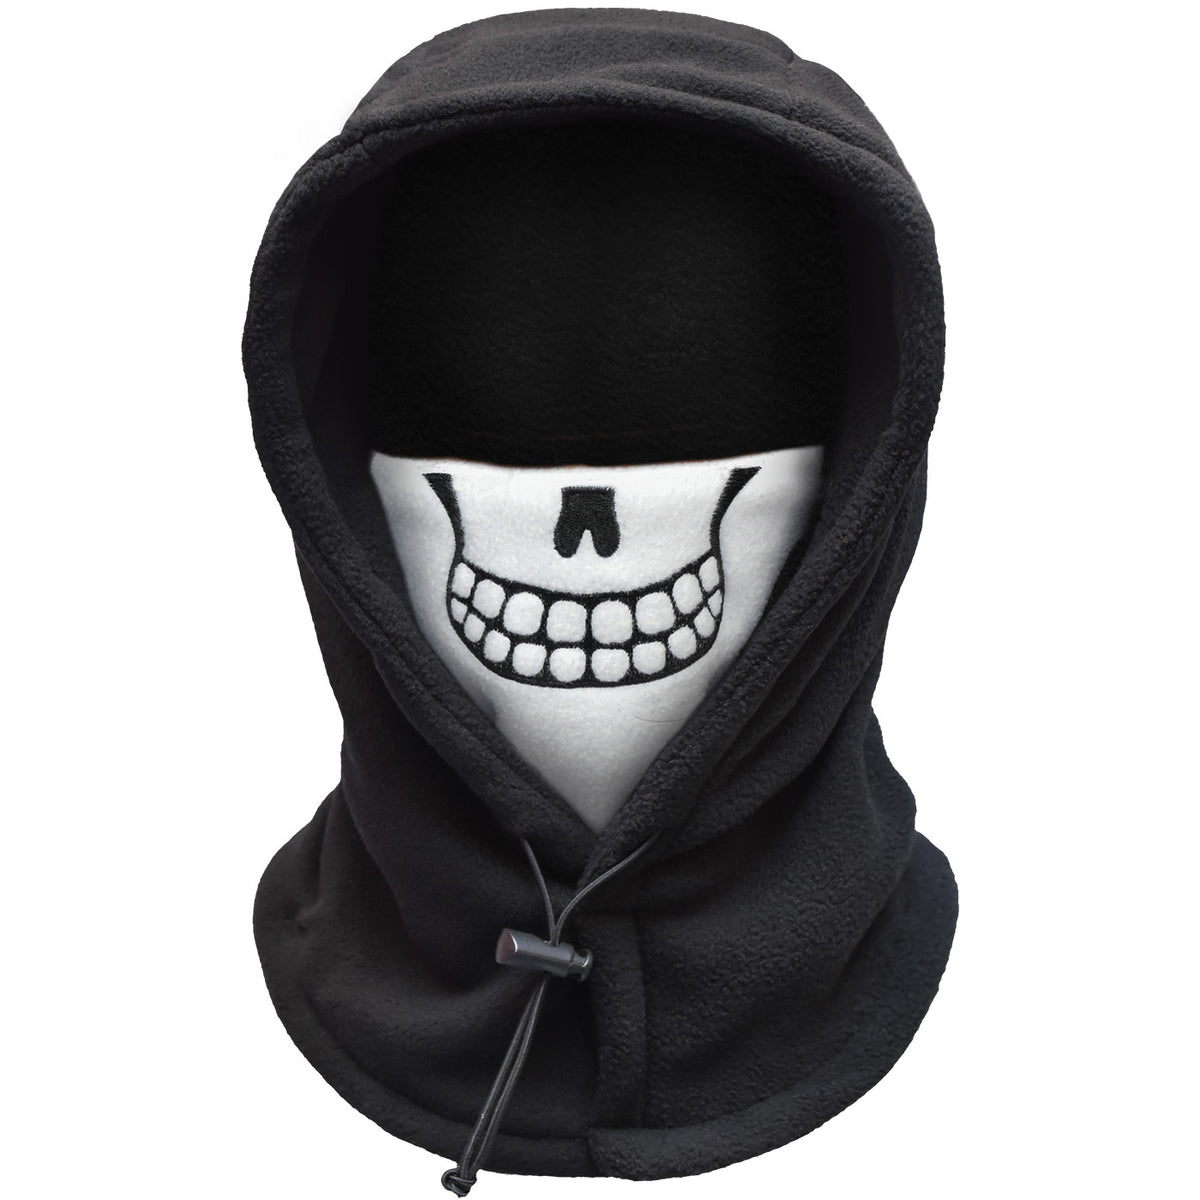 Kids Balaclava Ski Mask, Washable Fleece Winter Hat with Face Cover for Windproof, Skull